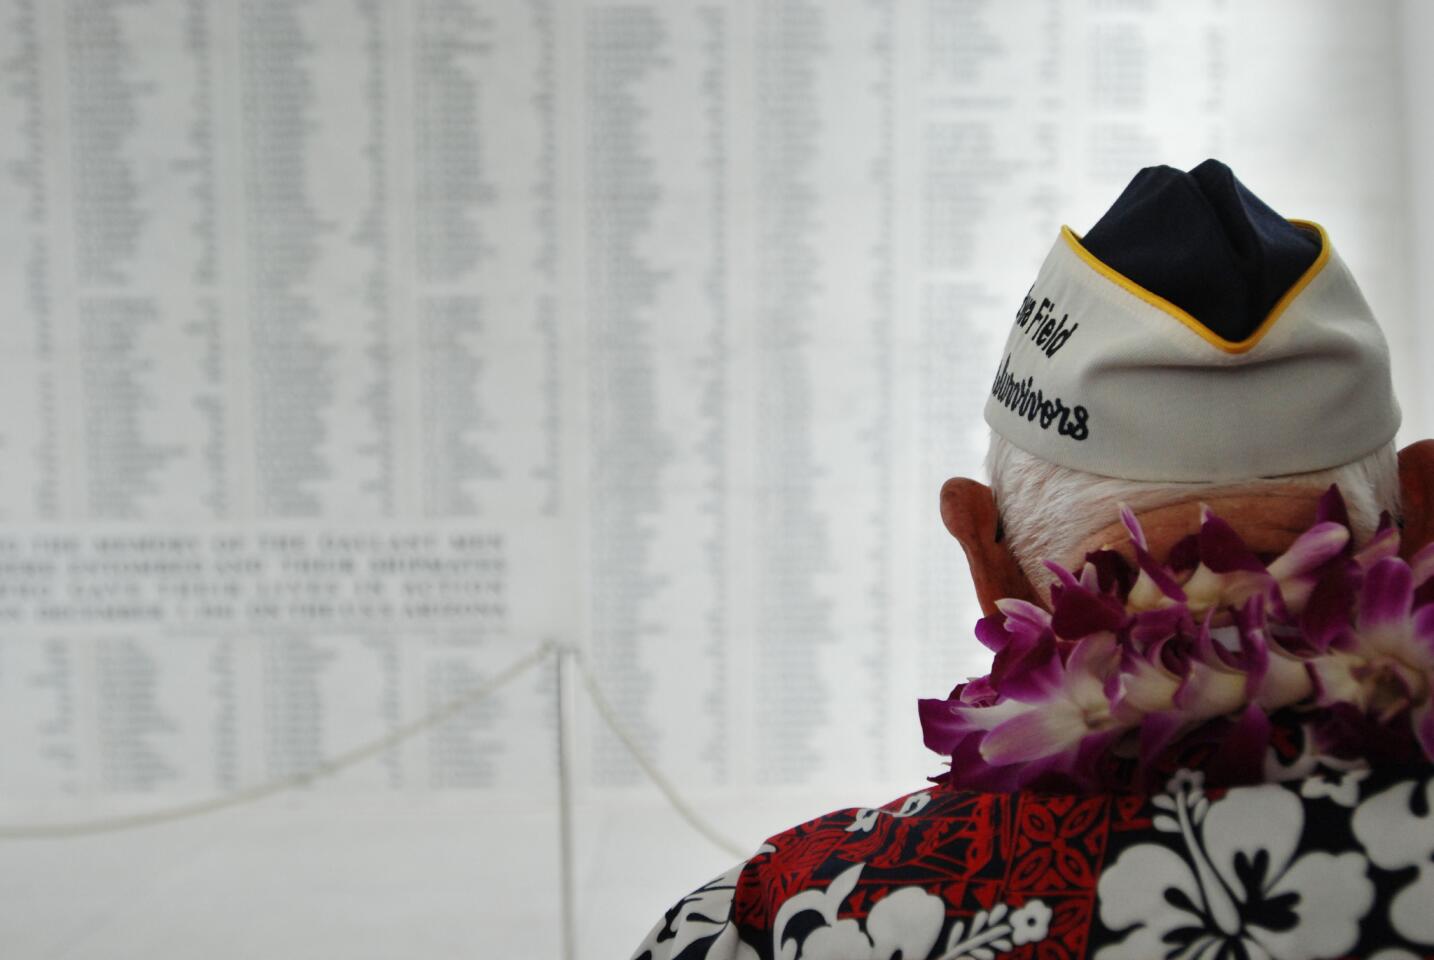 Pearl Harbor survivor John Hughes pauses to look at a wall engraved with the names of USS Arizona sailors and Marines killed in the attack on Pearl Harbor after a wreath-laying ceremony at the USS Arizona Memorial in Pearl Harbor, Hawaii, Monday, Dec. 7, 2015. A memorial and a wreath-laying ceremony were marking the 74th anniversary of the Japanese attack. (AP Photo/Audrey McAvoy)